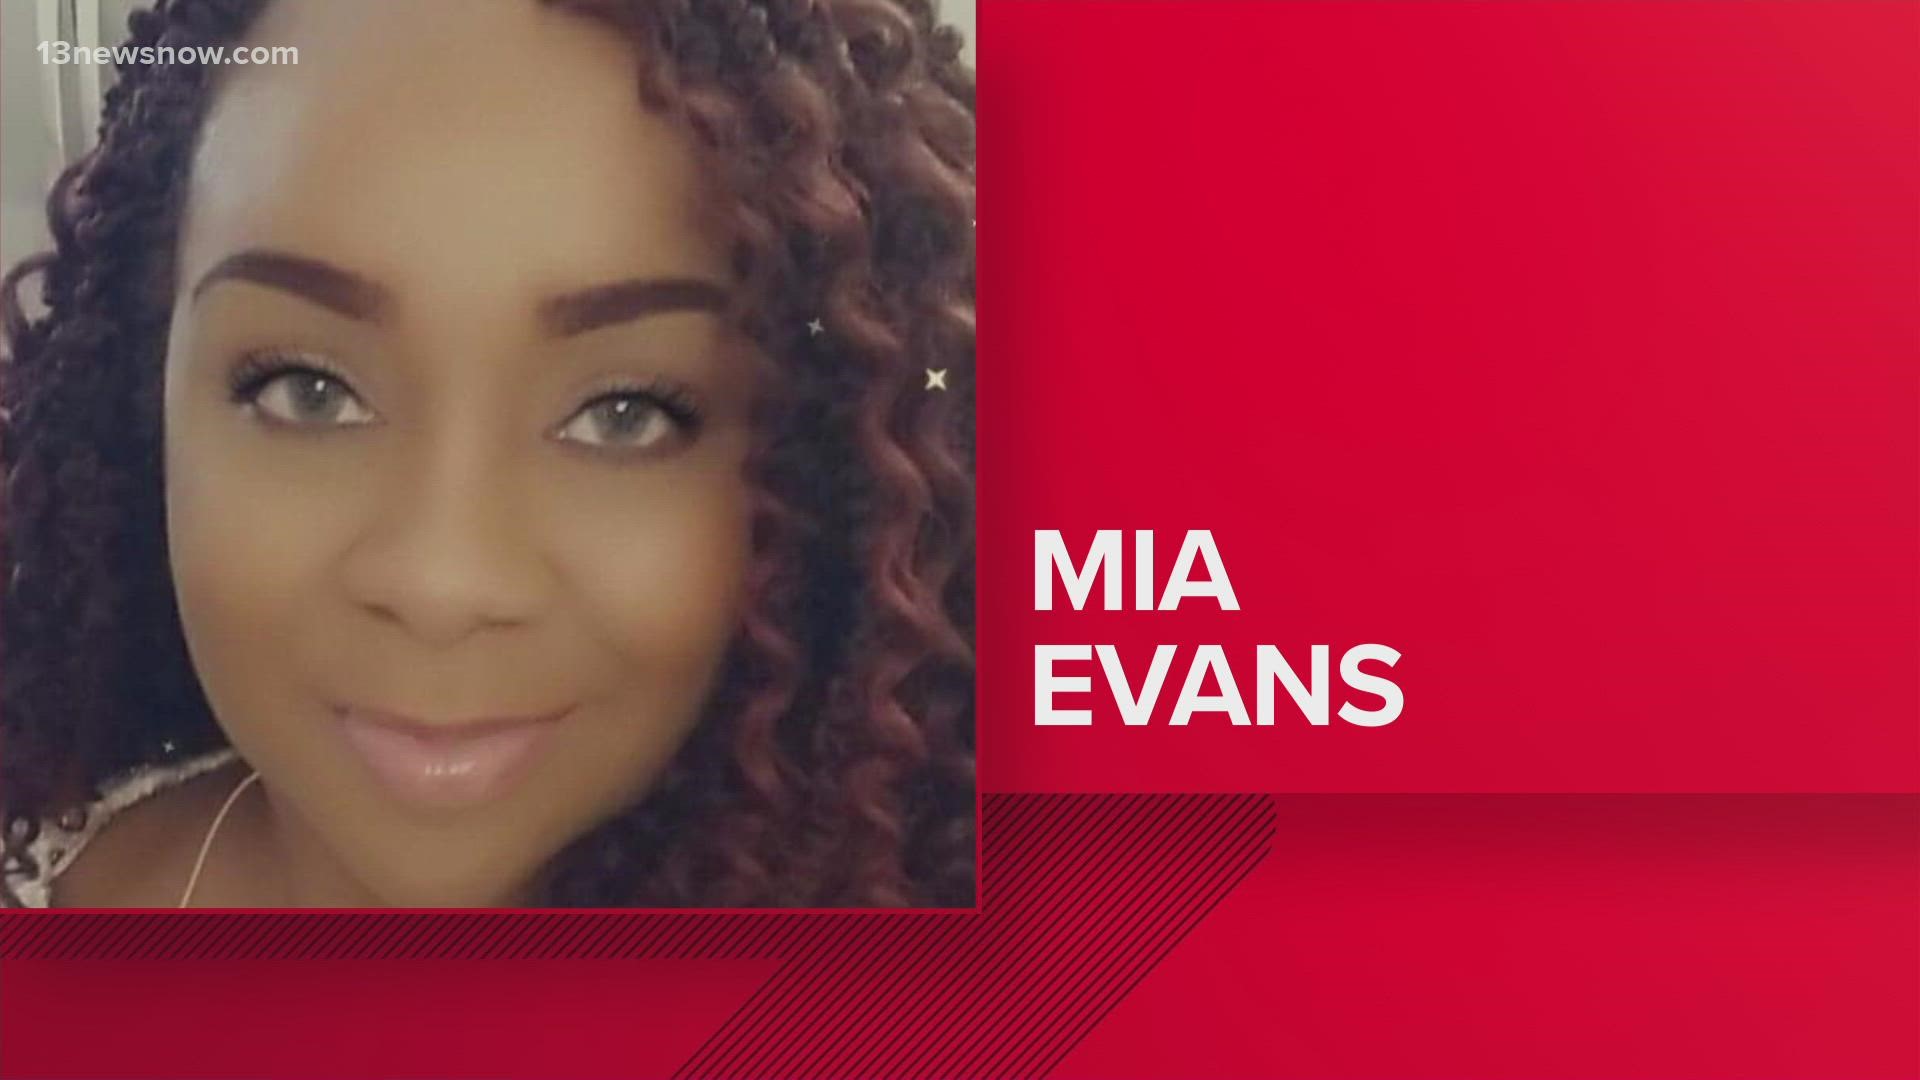 Mia Evans and her dog died in a fire Tuesday.